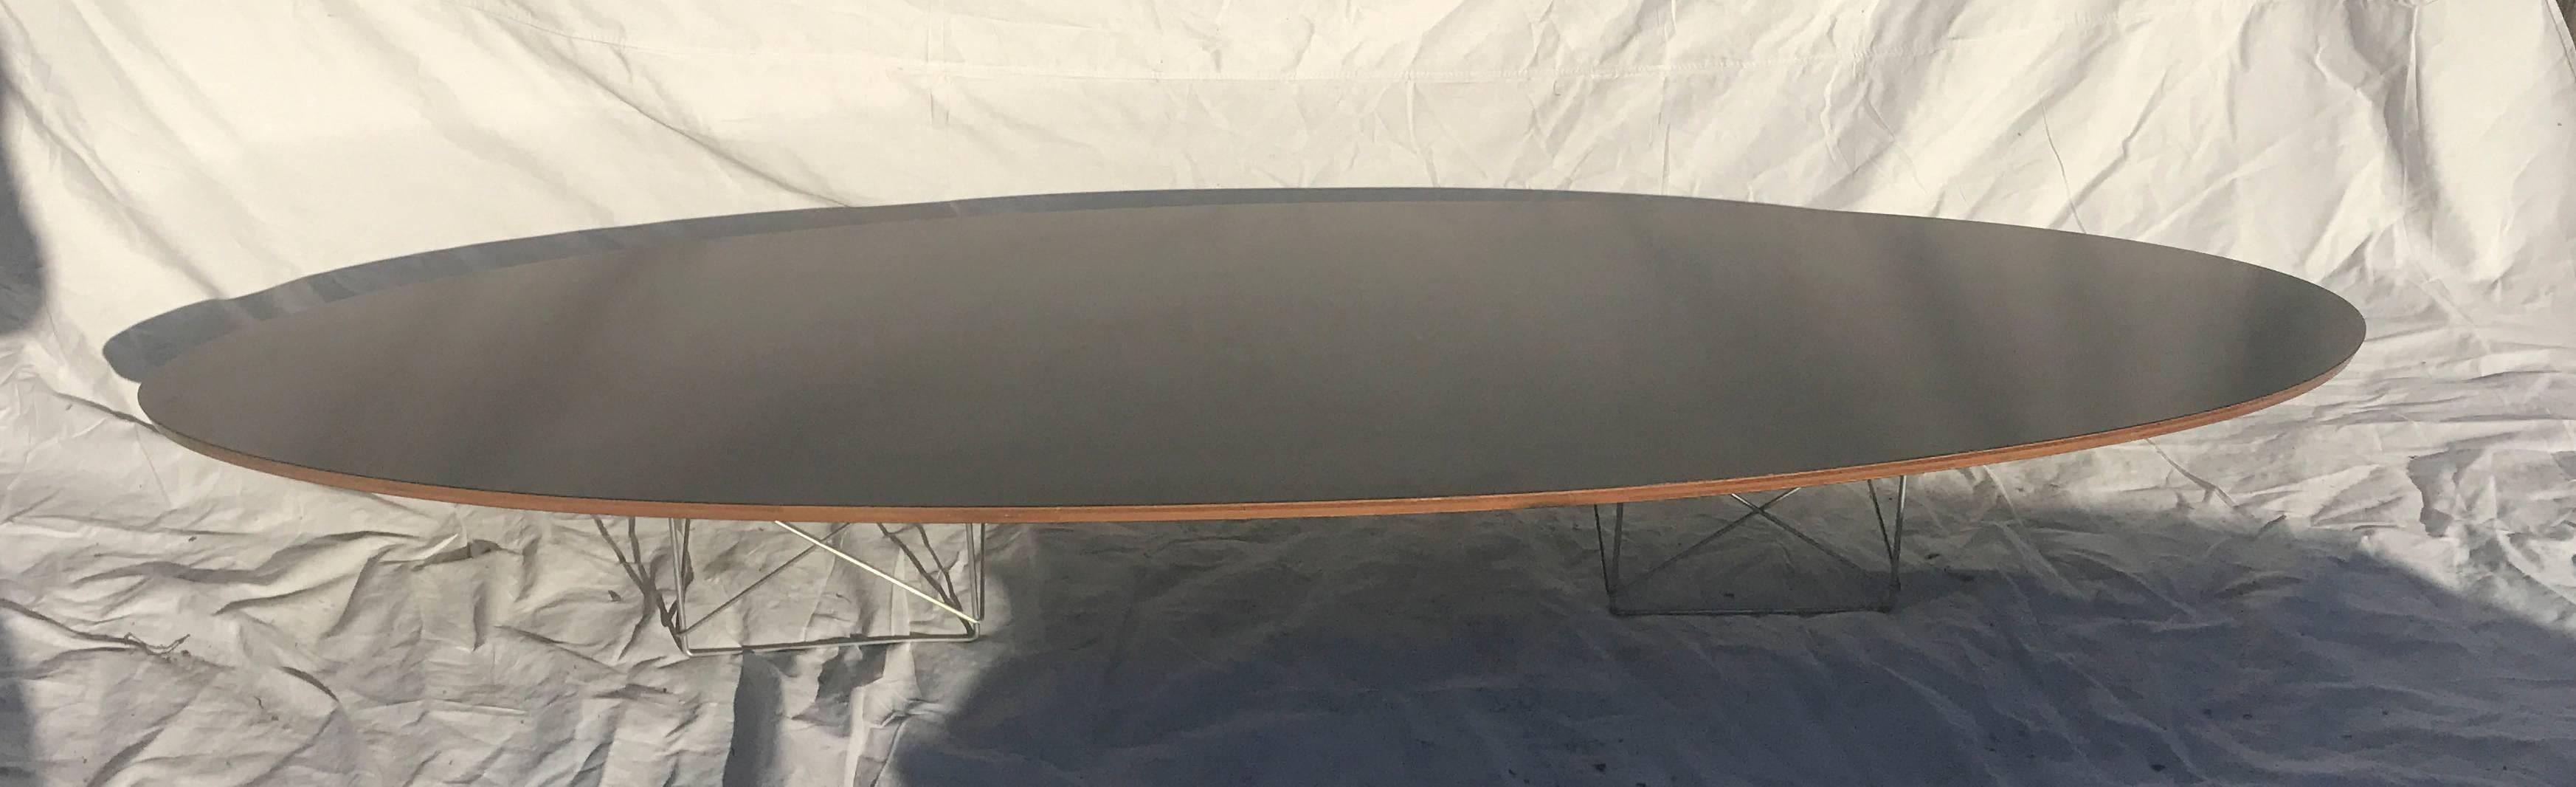 Elliptical Table Rod (ETR) - Original Eames Elliptical Table with Rod base often referred to as the Surfboard table due to its elongated shape and low profile. It utilizes two of the wire bases designed for their LTR tables, which support a long,